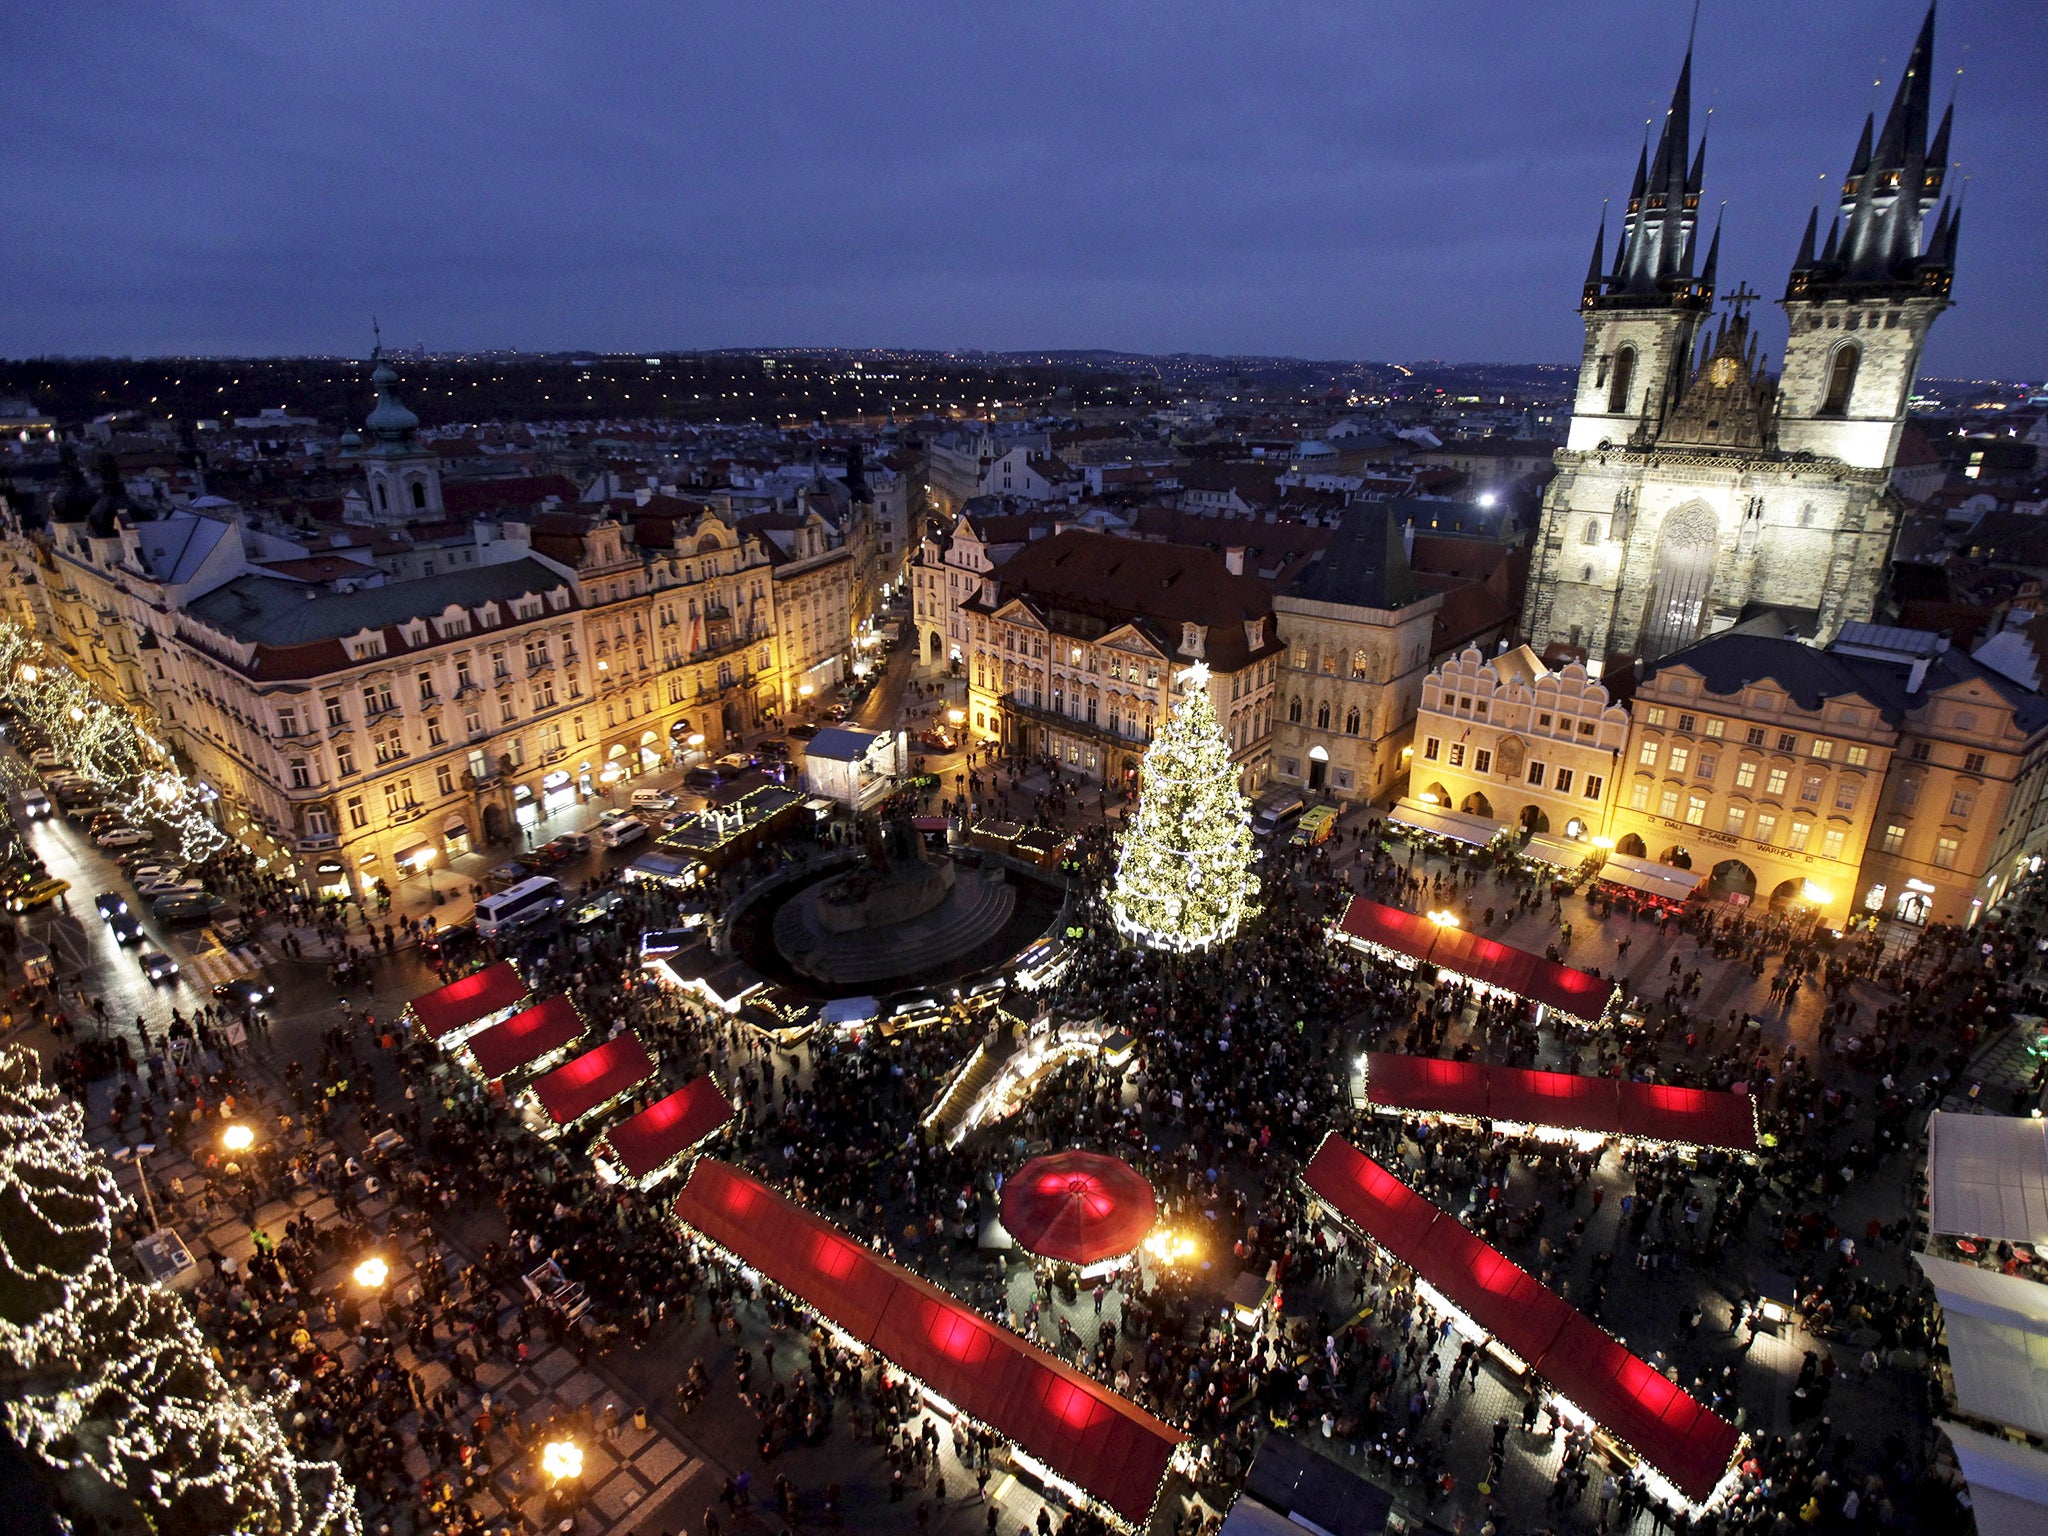 A Christmas tree is illuminated as the traditional Christmas market opens at the Old Town Square in Prague, Czech Republic